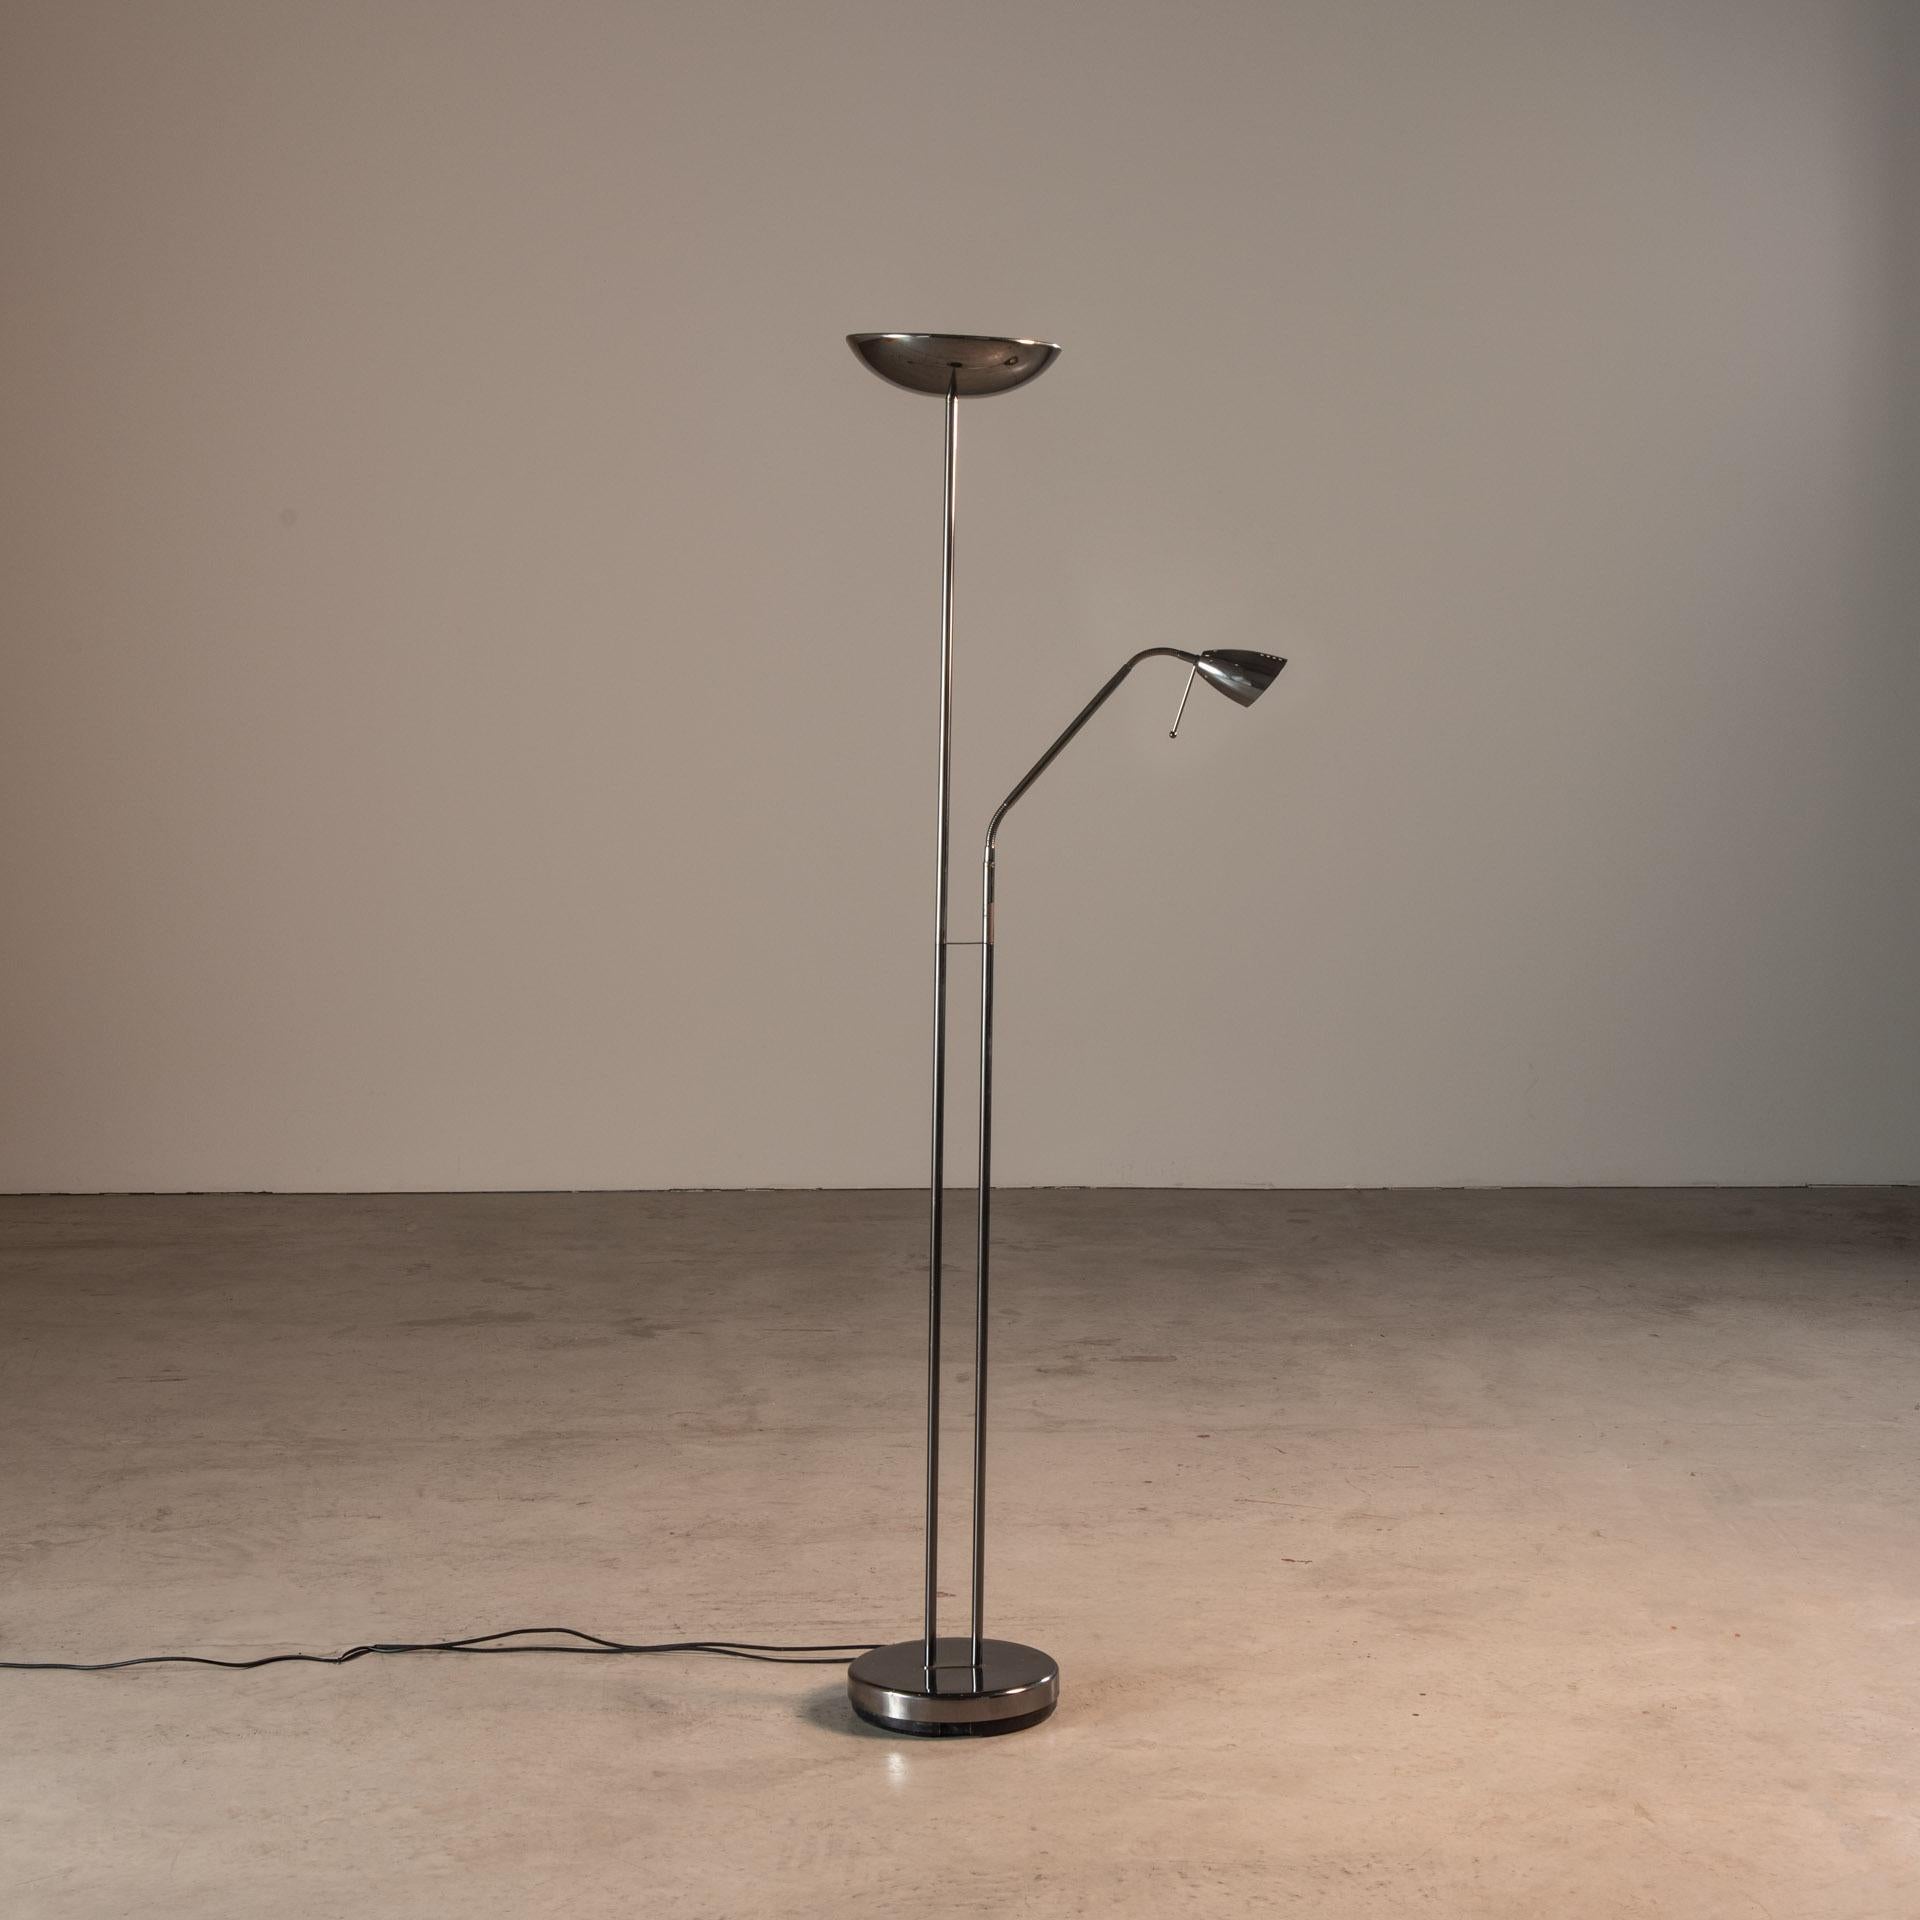 This mid-20th century floor lamp features a sleek design typical of the era, with a focus on functional simplicity and the use of modern materials such as steel and chrome. The lamp has a dual-lighting feature, with one large, inverted bowl-like